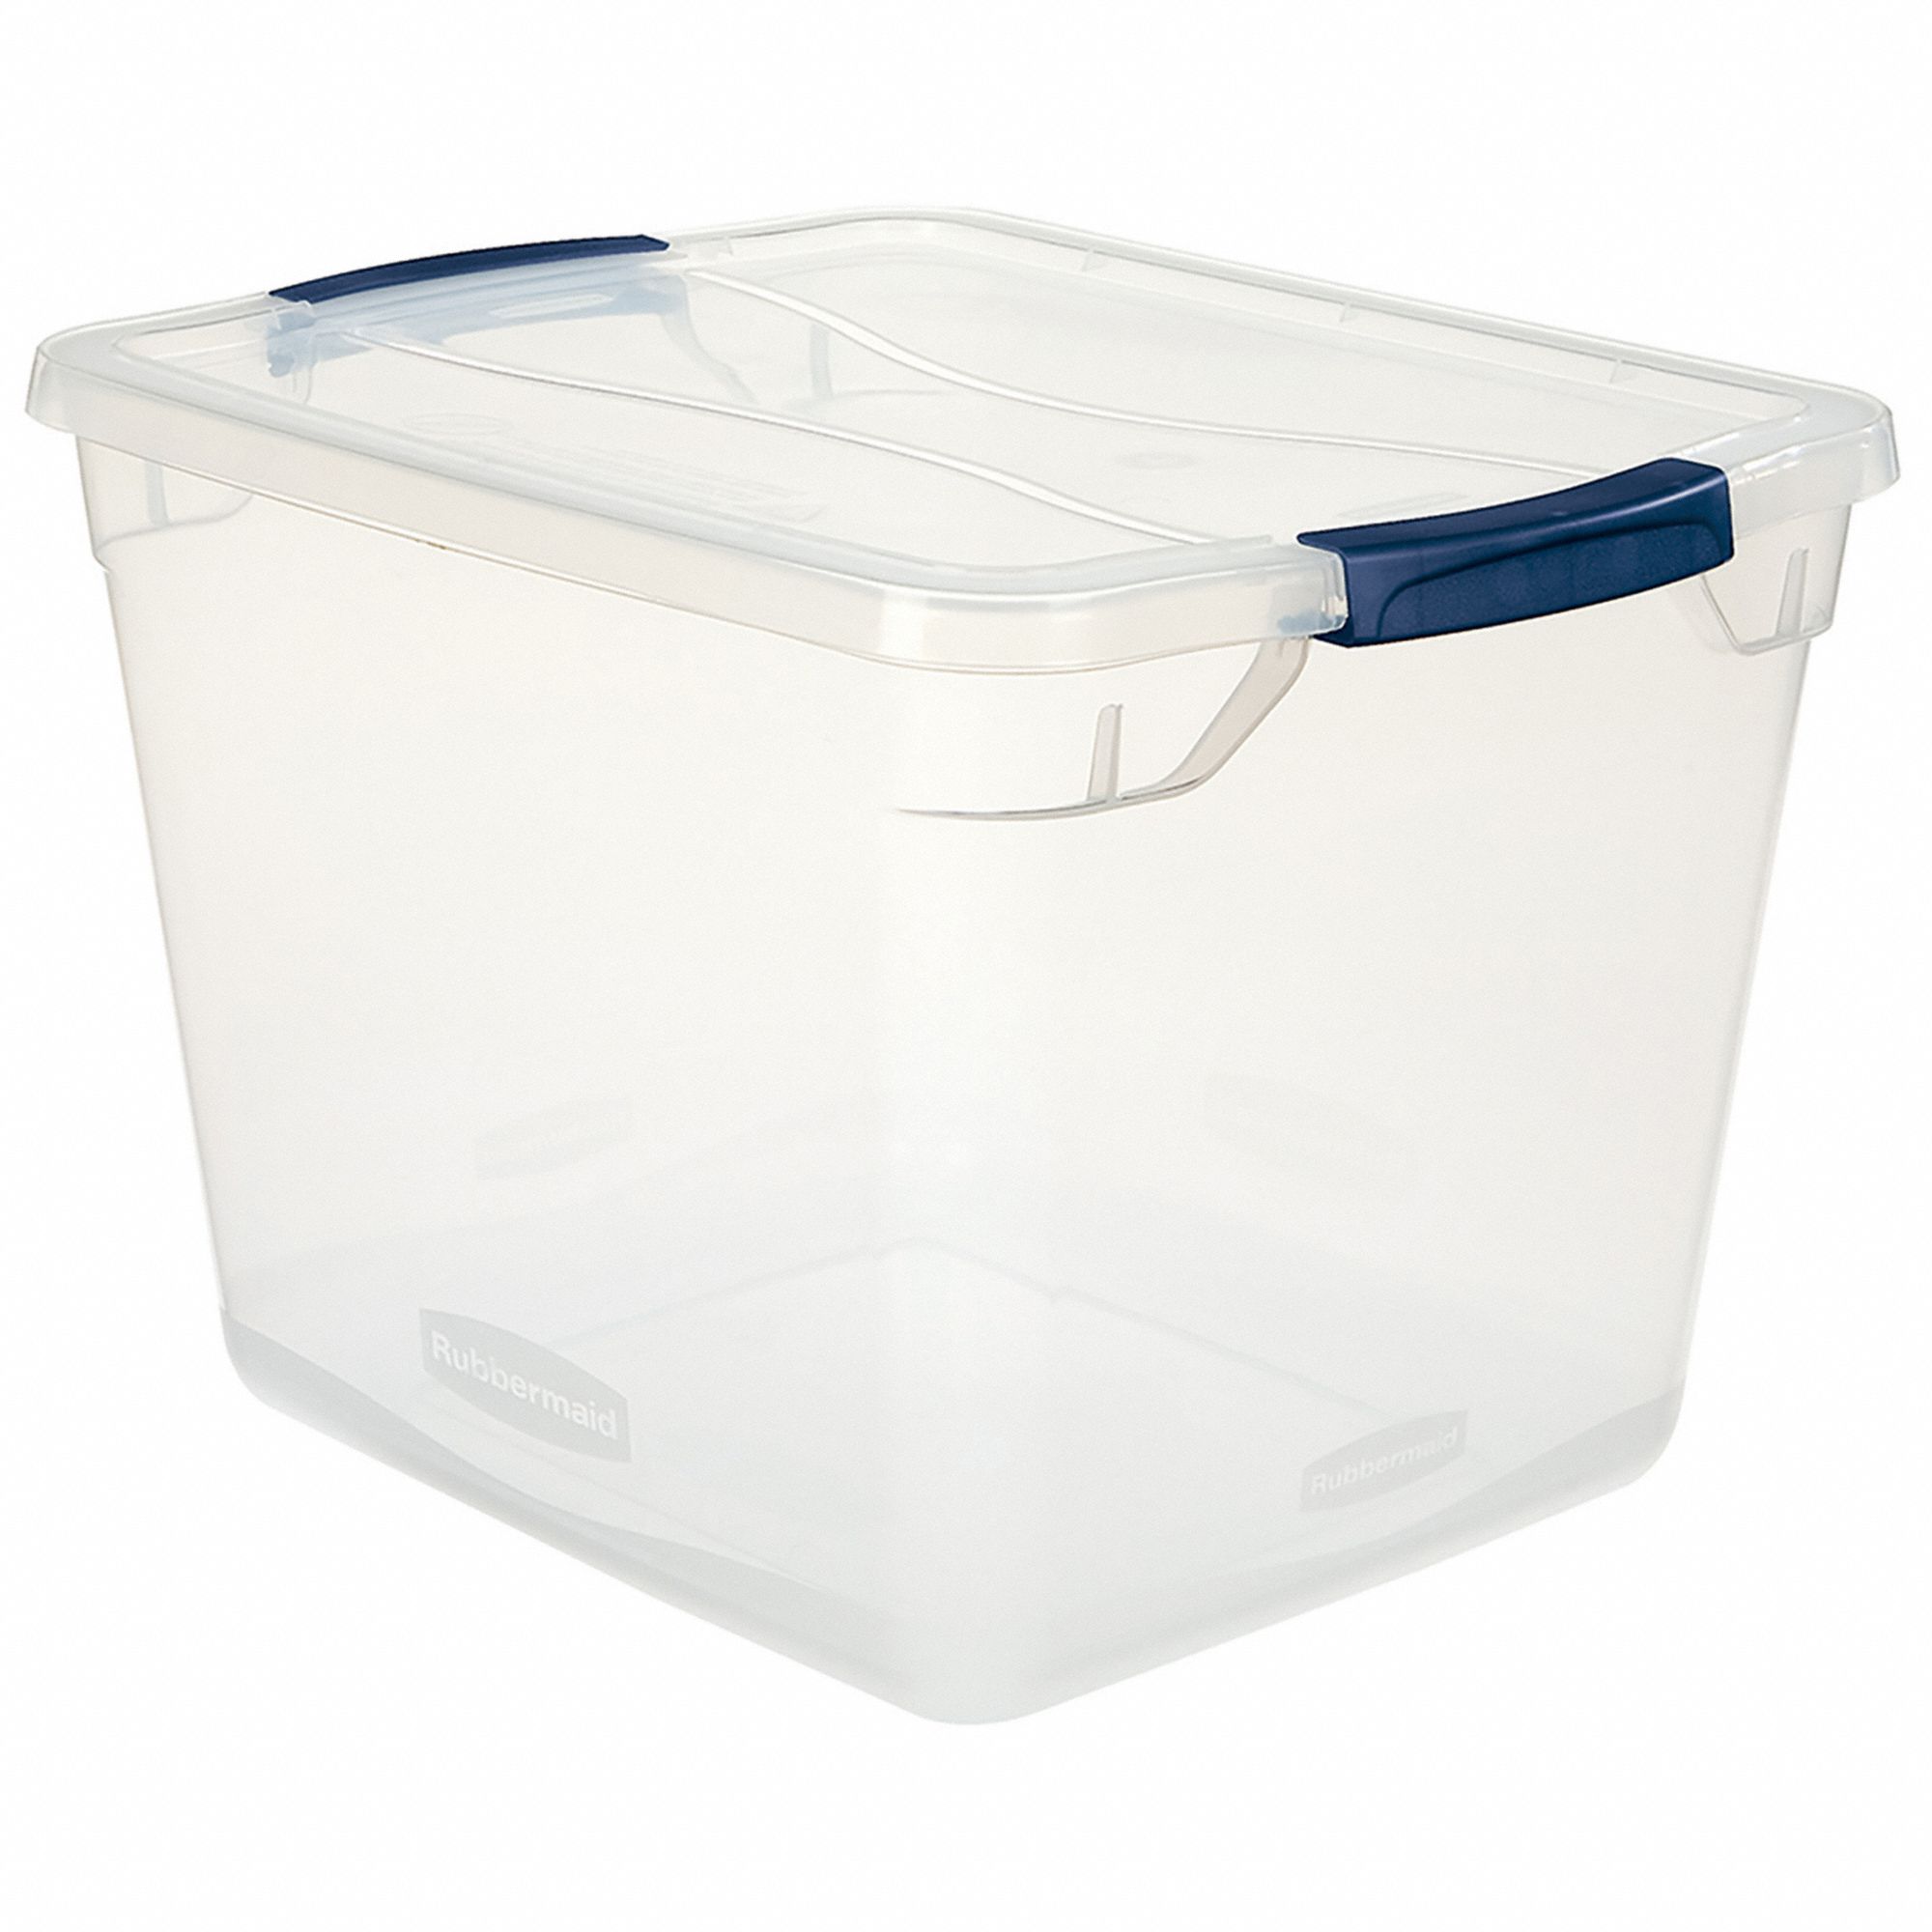 Storage Tote: 7.5 gal, 18 3/4 in x 13 3/8 in x 10 1/2 in, Clear Body, Clear Lid, Nestable